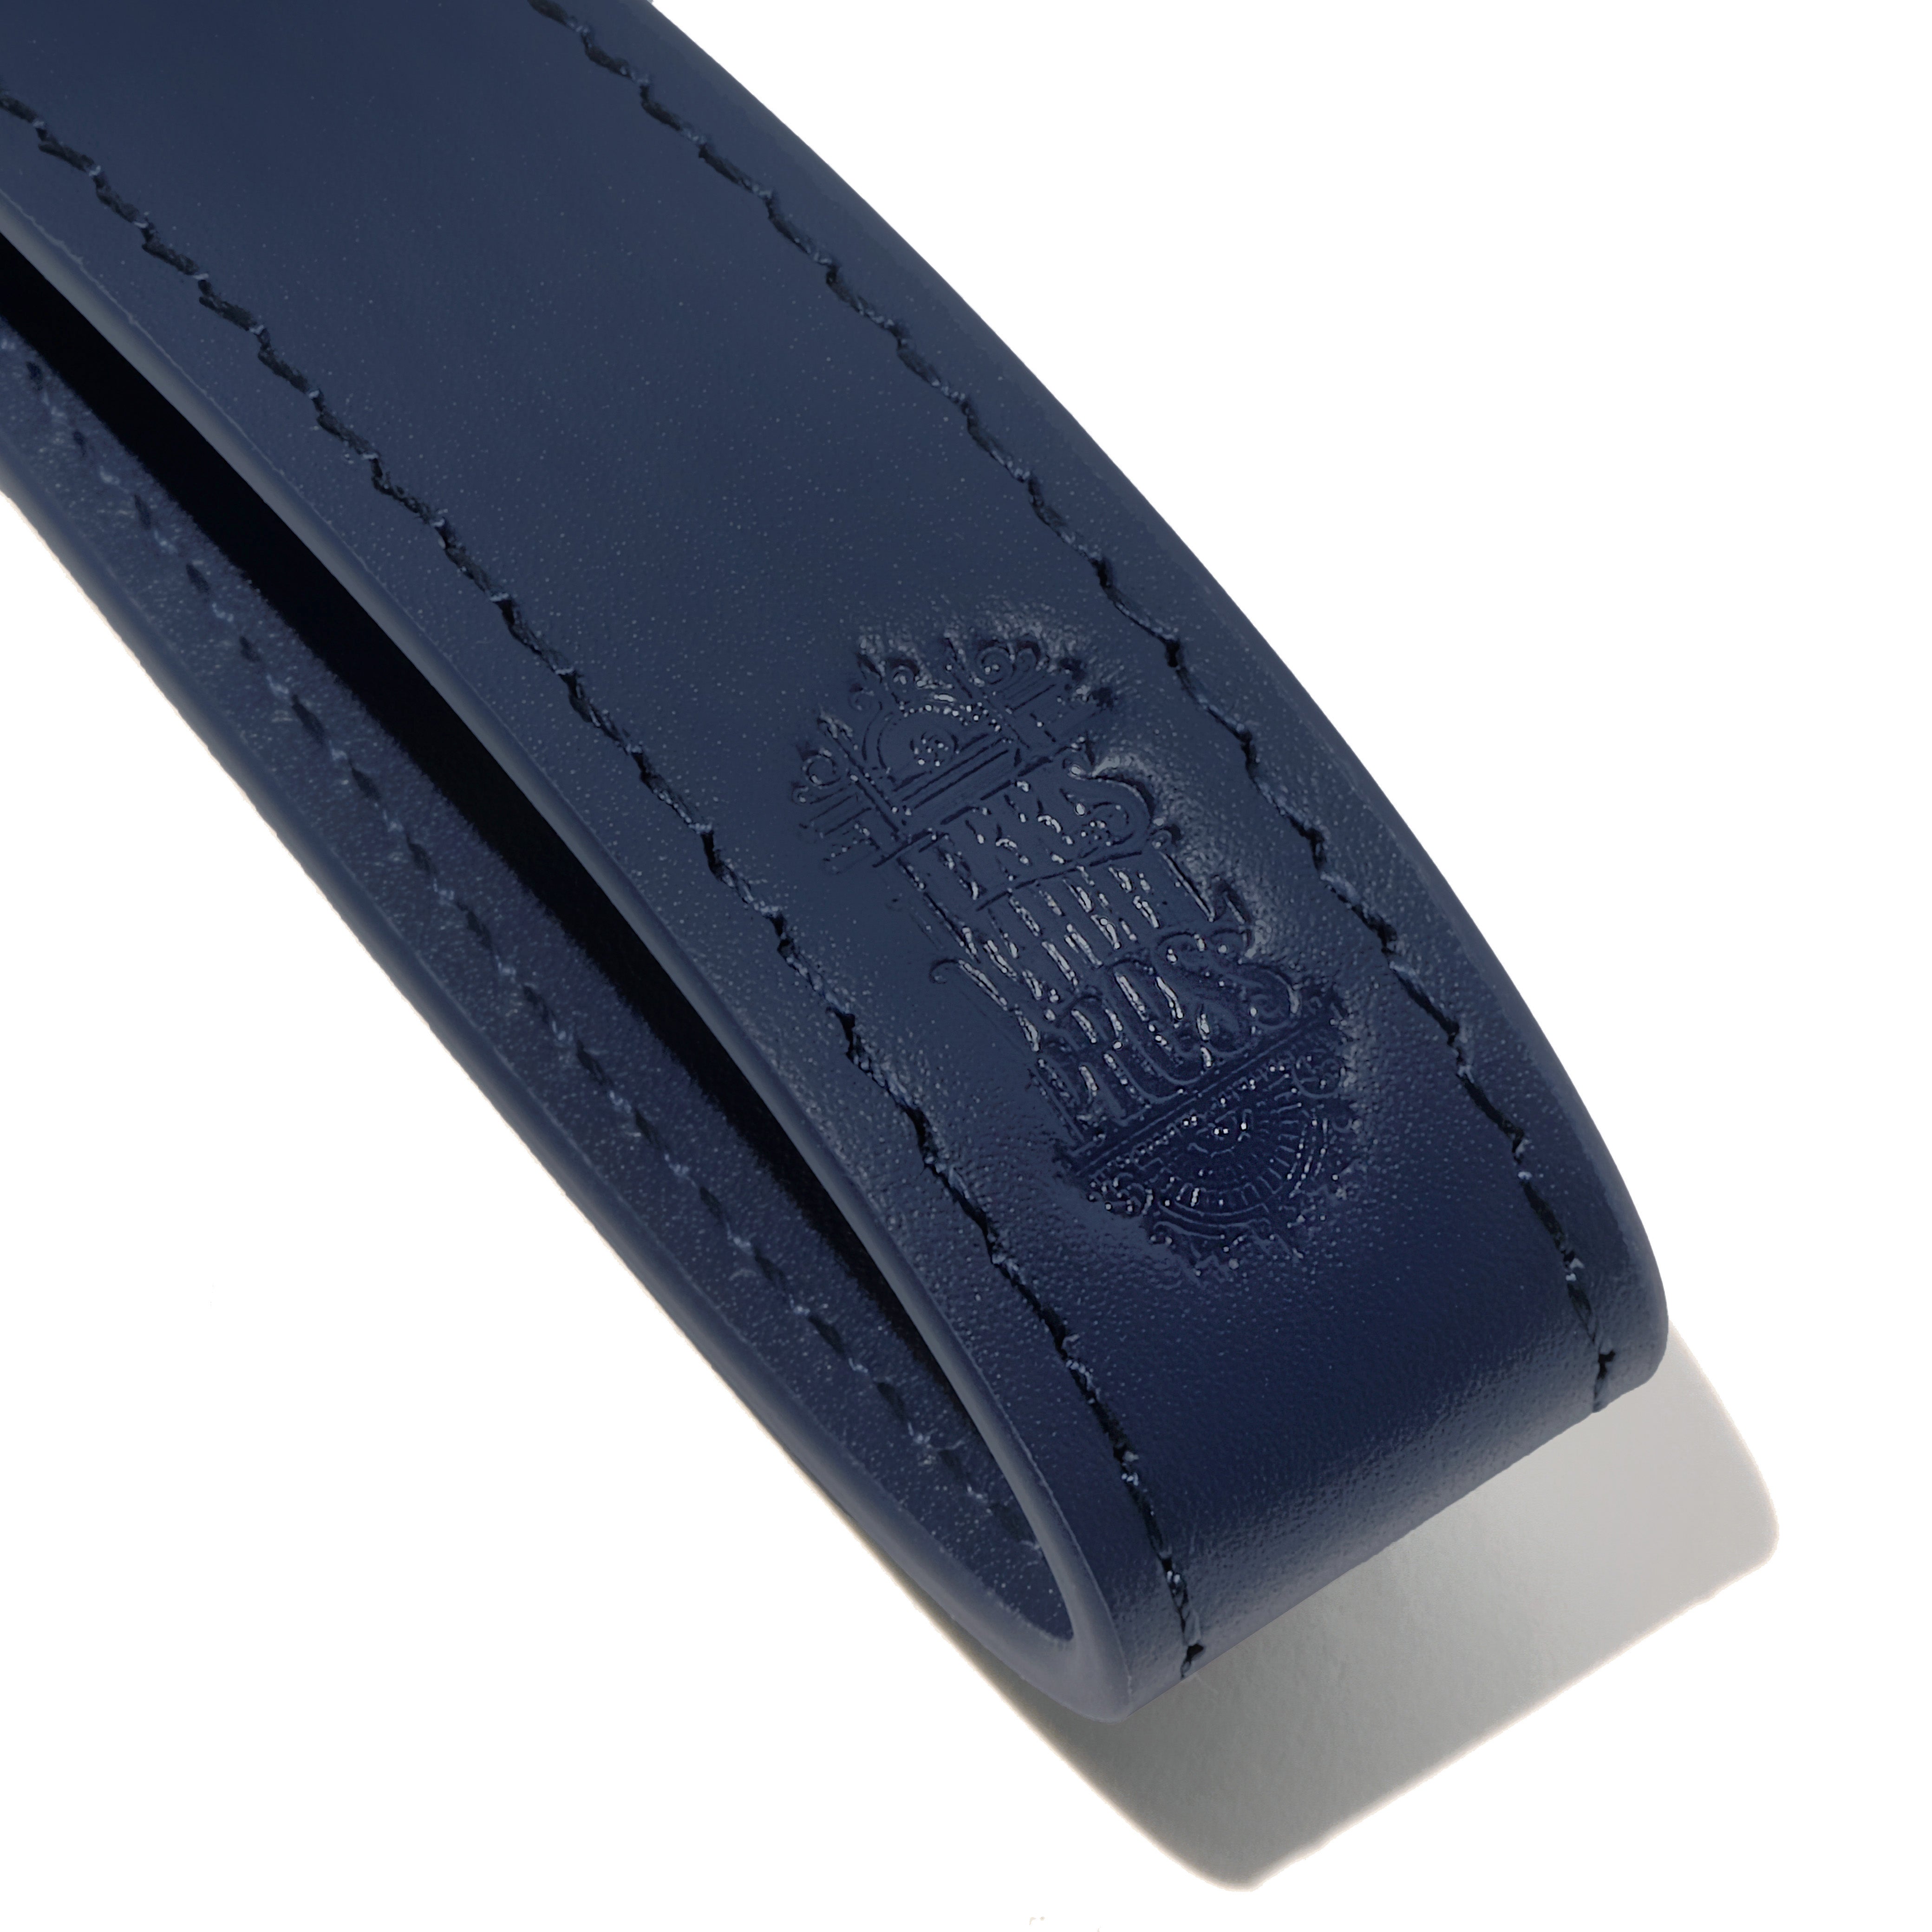 Leather Stationery Collection - The Pendant Folio A5 / Navy